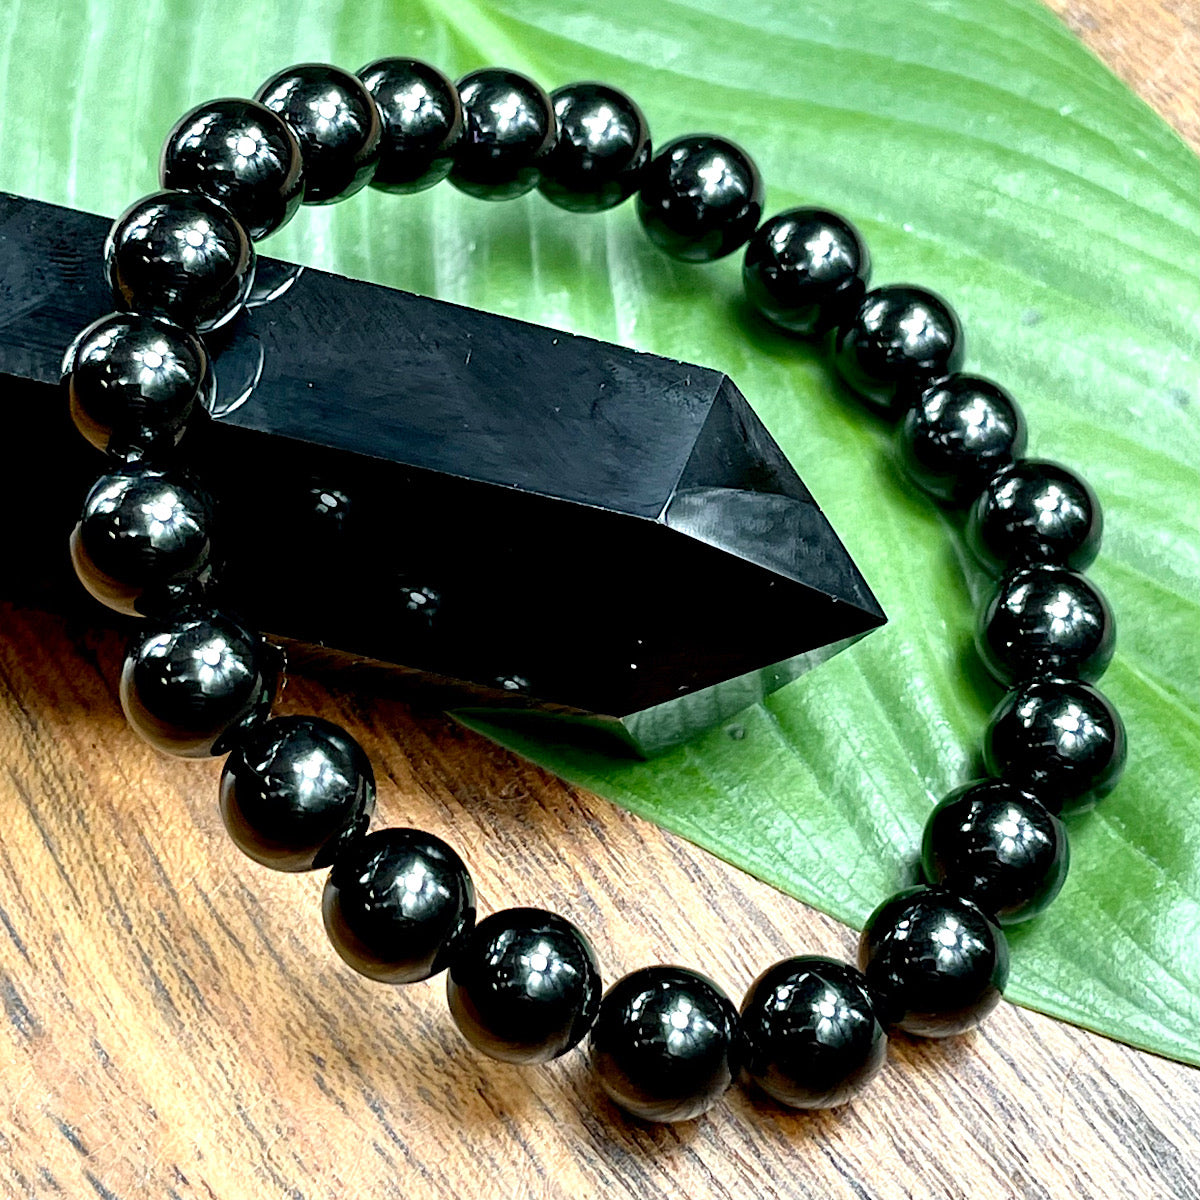 Necklace - Healing Stone on Quote Cards Black Onyx - Strength